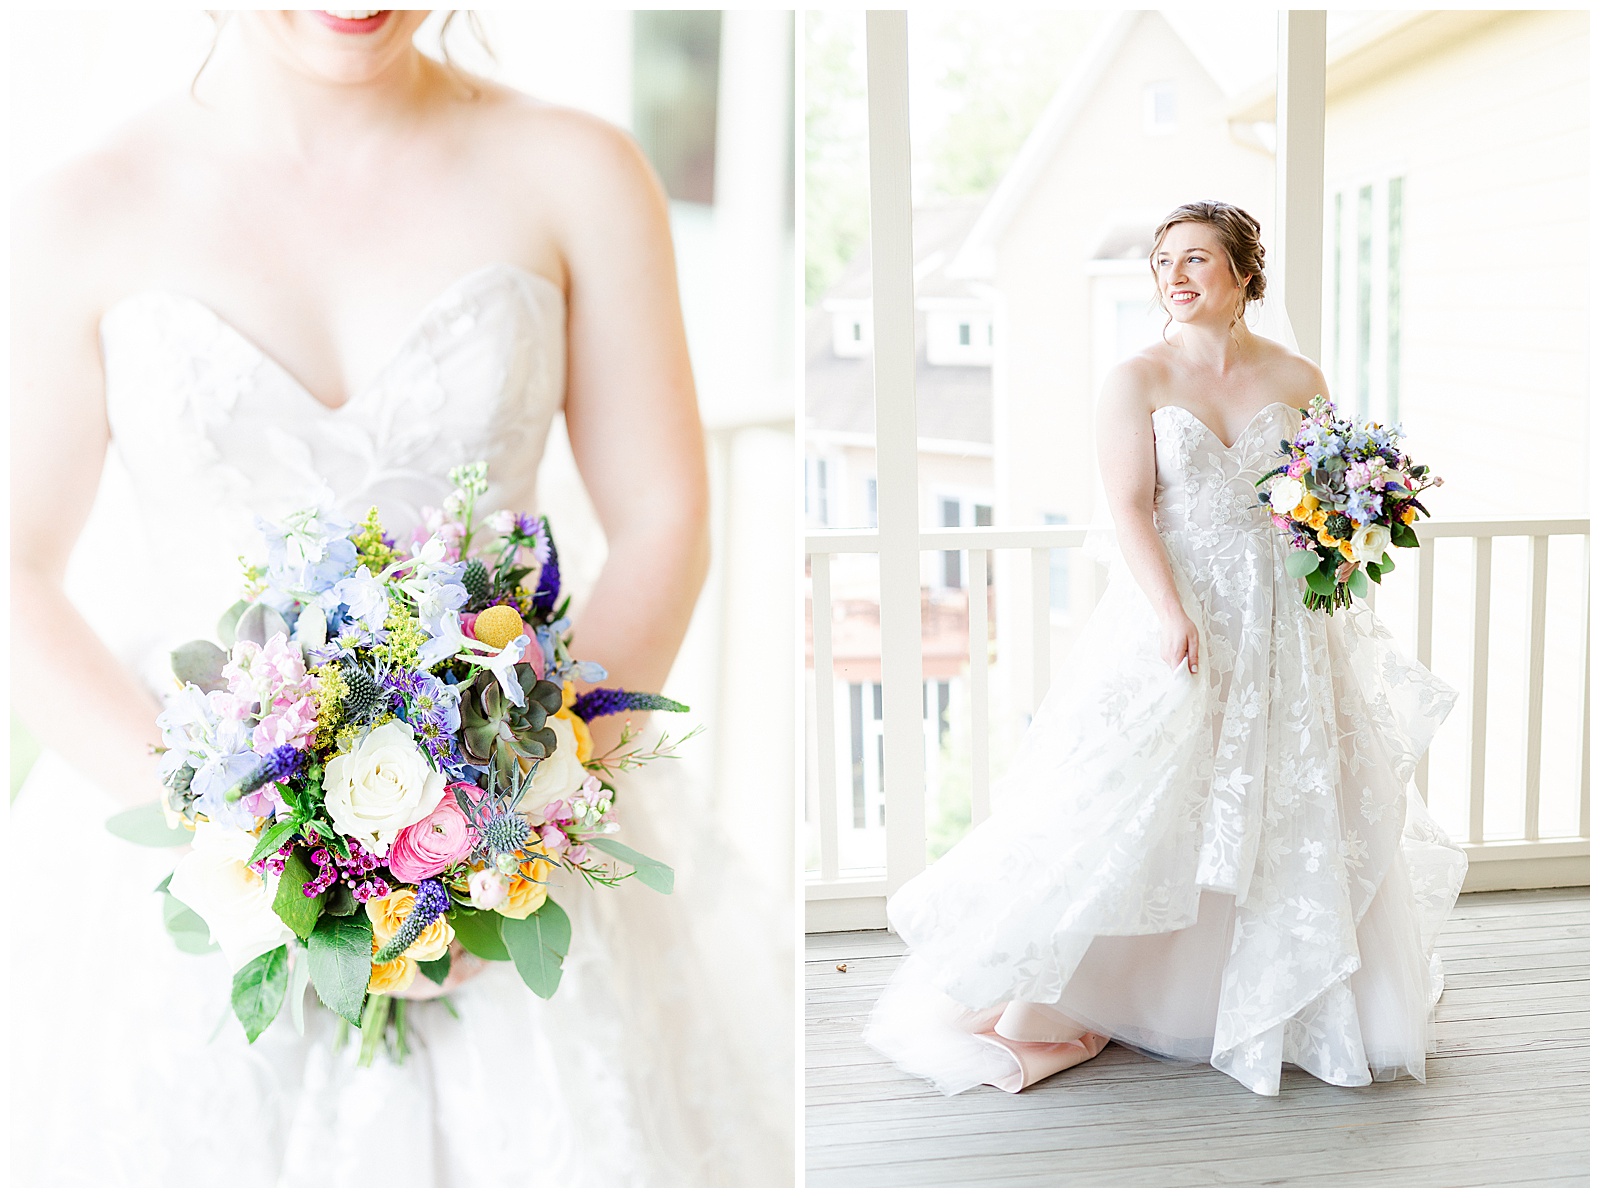 Colorful Bouquet and Strapless Lace Wedding Dress from Outdoorsy Summer Wedding at North Carolina Lakehouse in the Mountains | check out the full wedding at KevynDixonPhoto.com